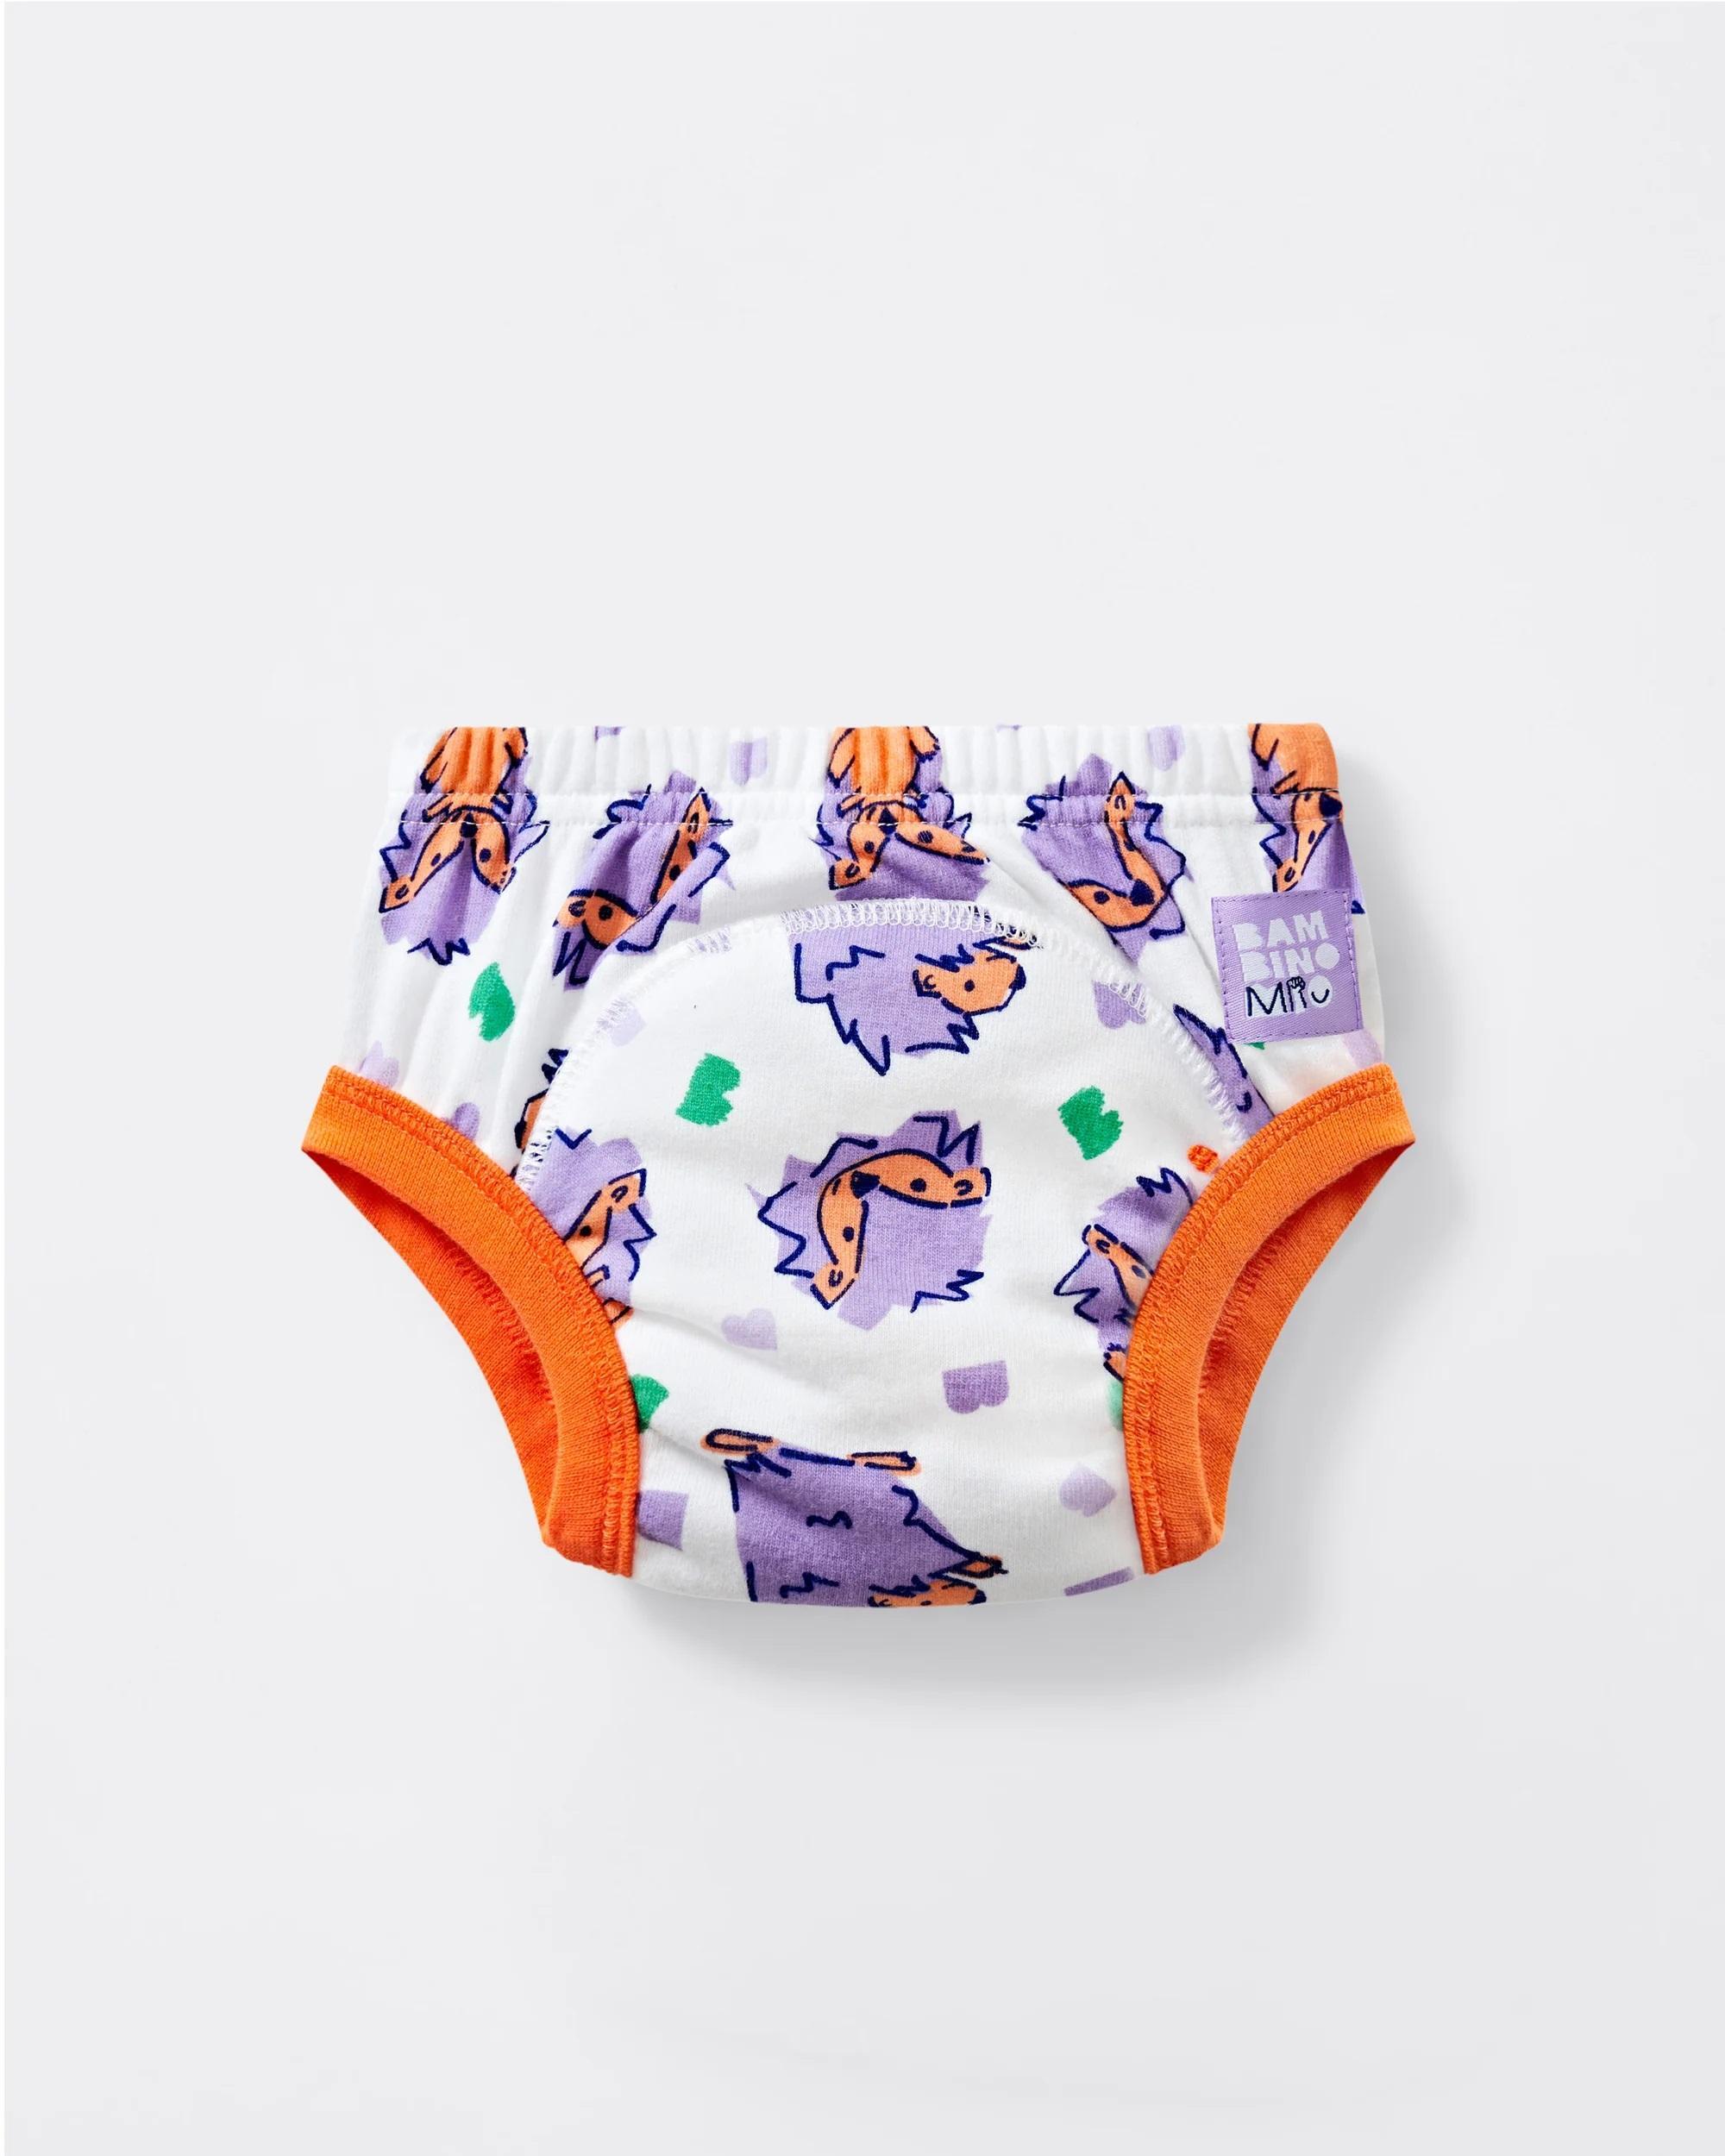 https://www.nordbaby.com/products/images/g130000/131840/nappies-and-covers-bambino-mio-spike-bambino-mio-potty-training-pants-spike-131840-82066.jpg